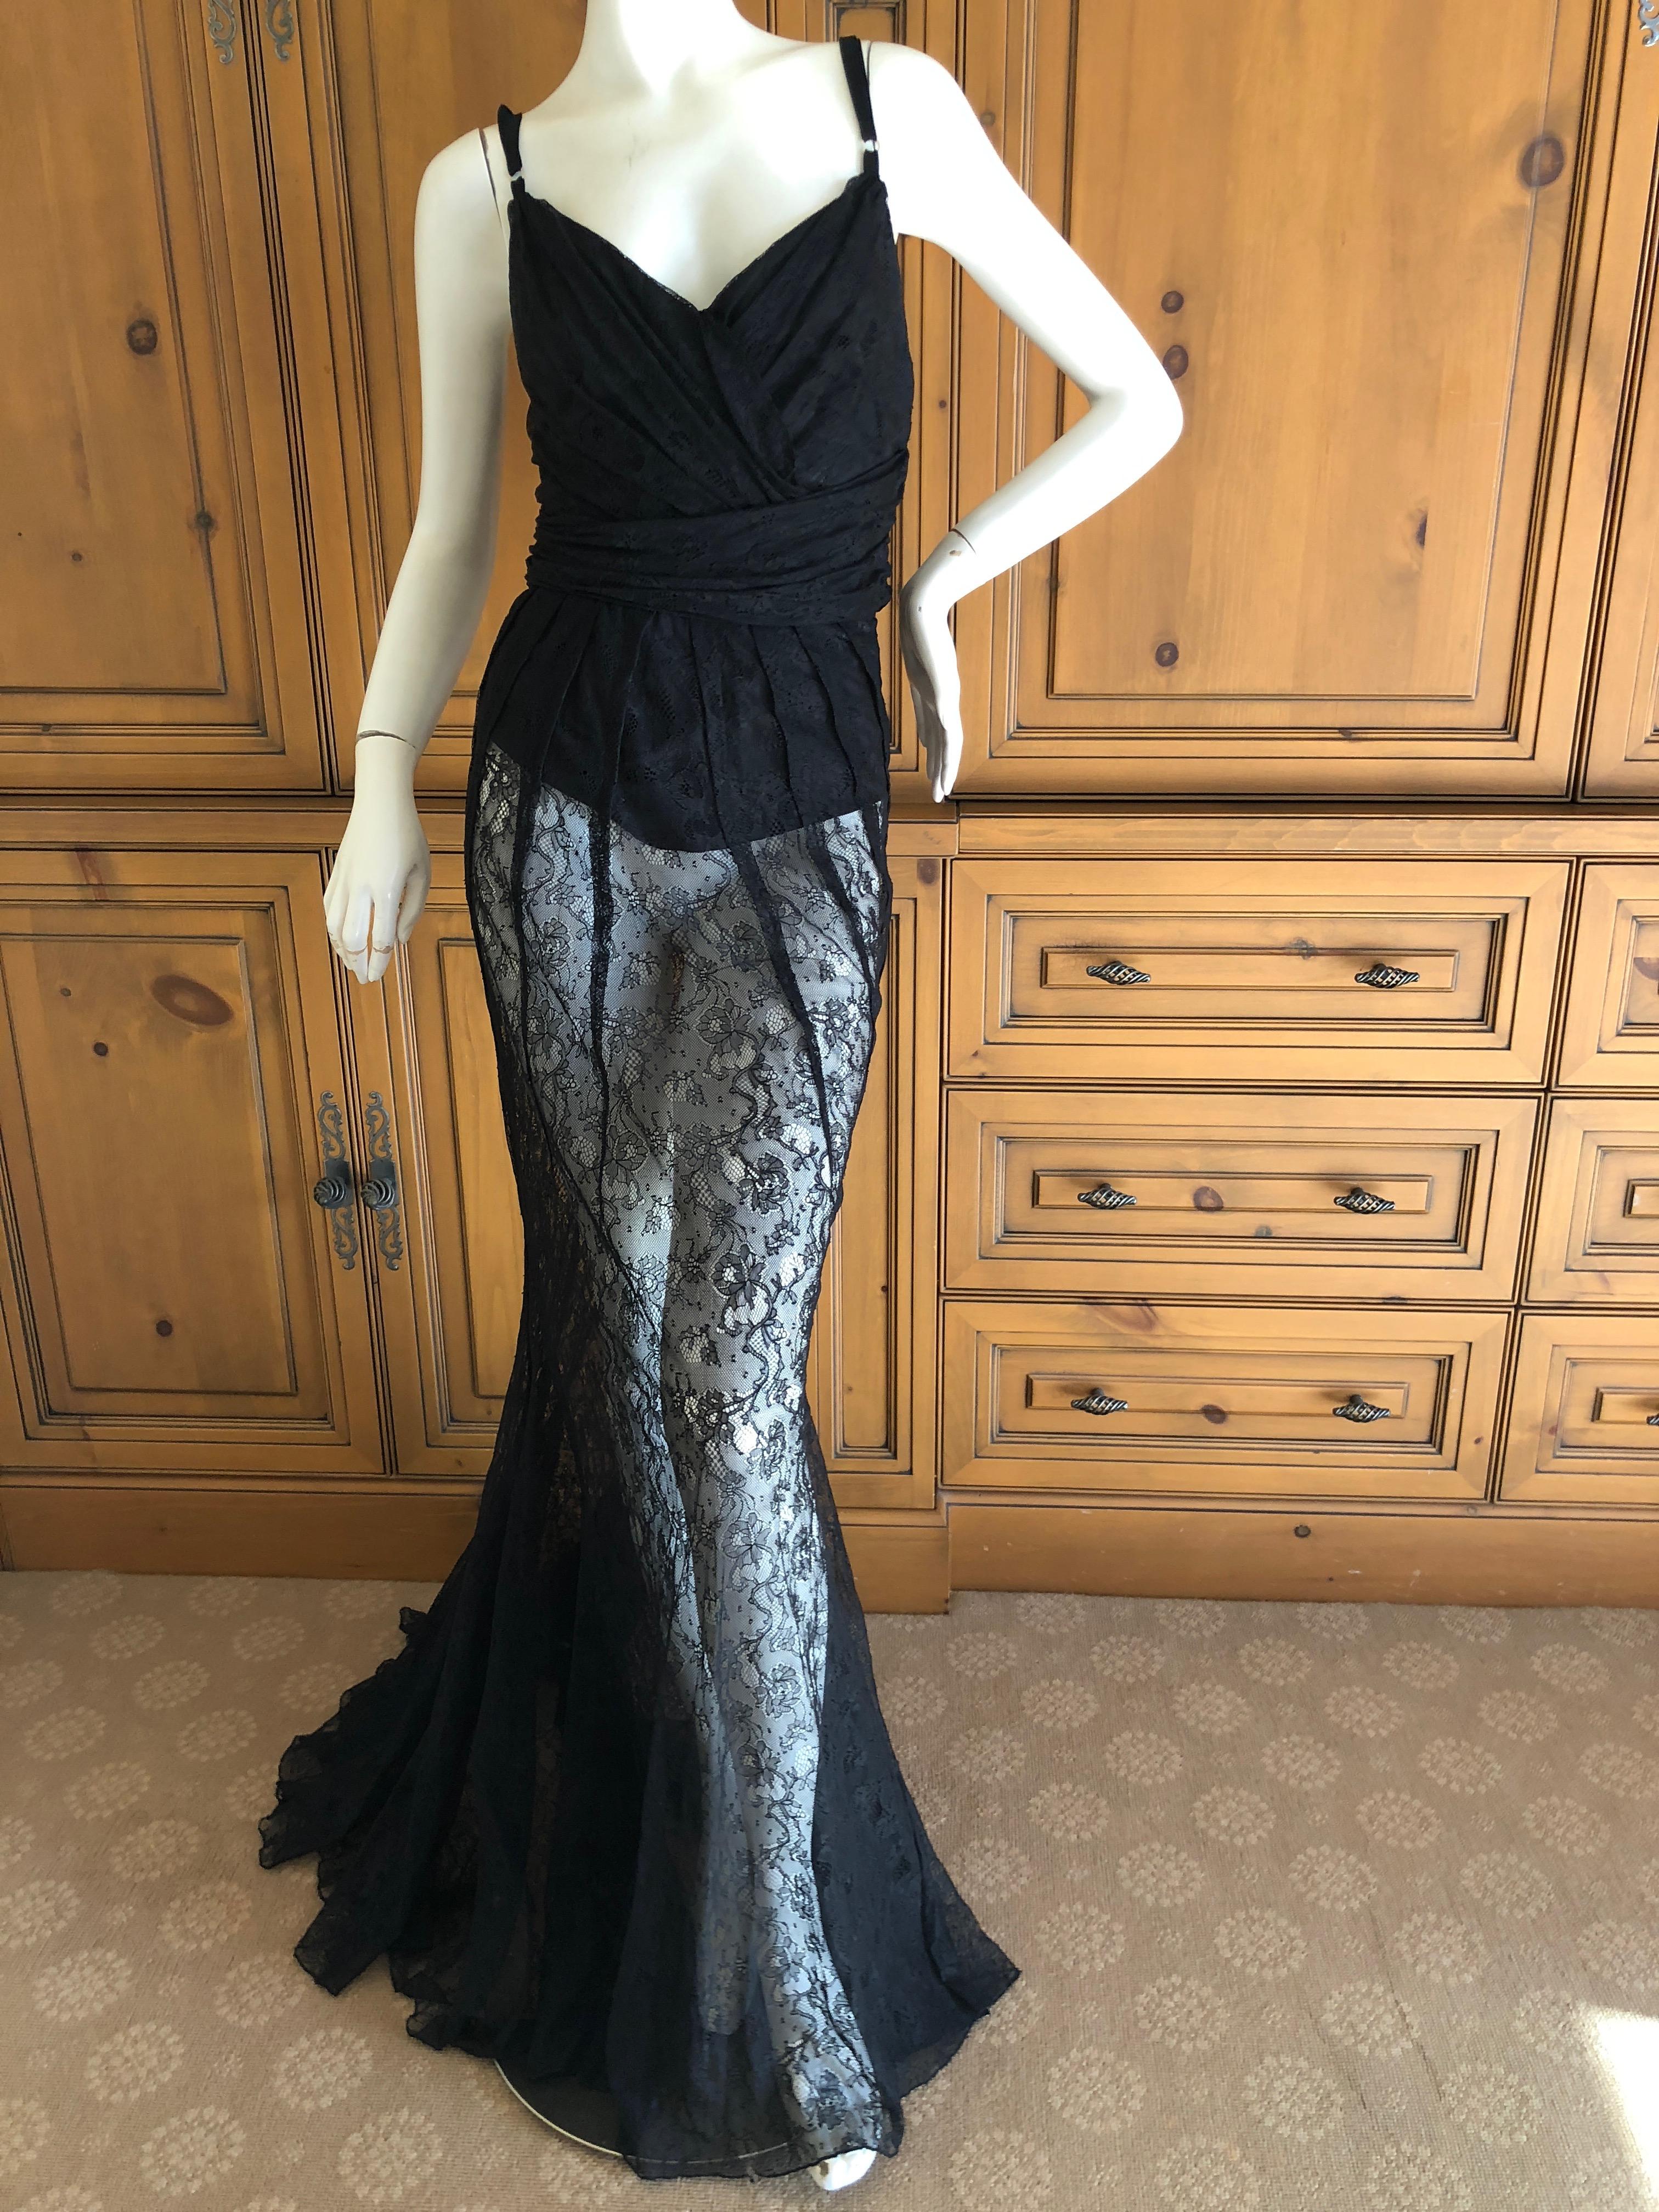 Women's D&G Dolce & Gabbana Sheer Black Lace Vintage Evening Dress with Train For Sale